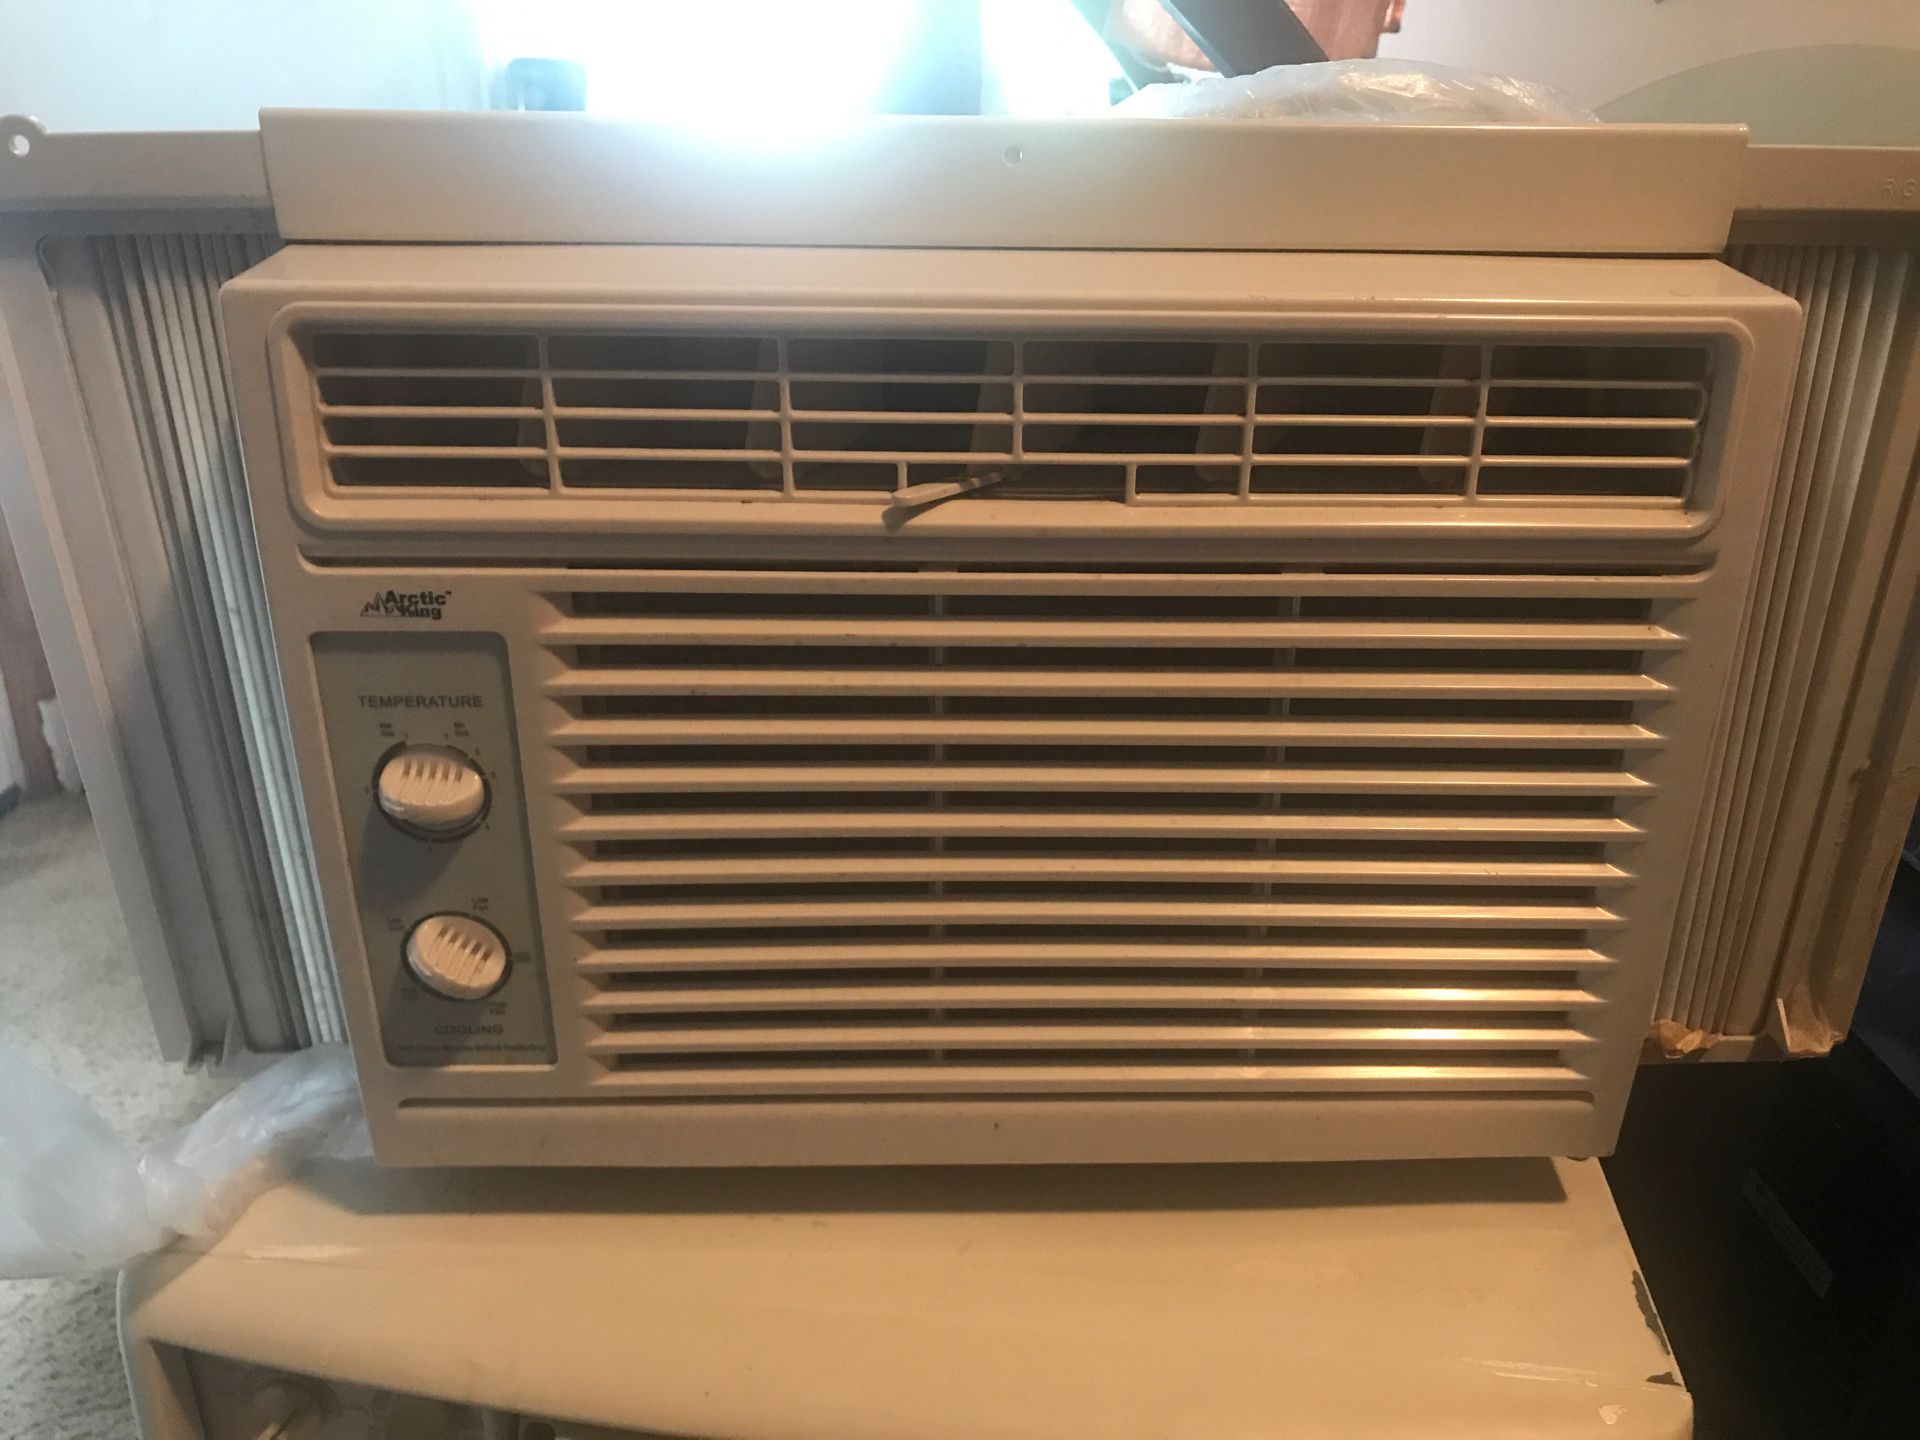 5000 BTU air conditioner blowing very cold air